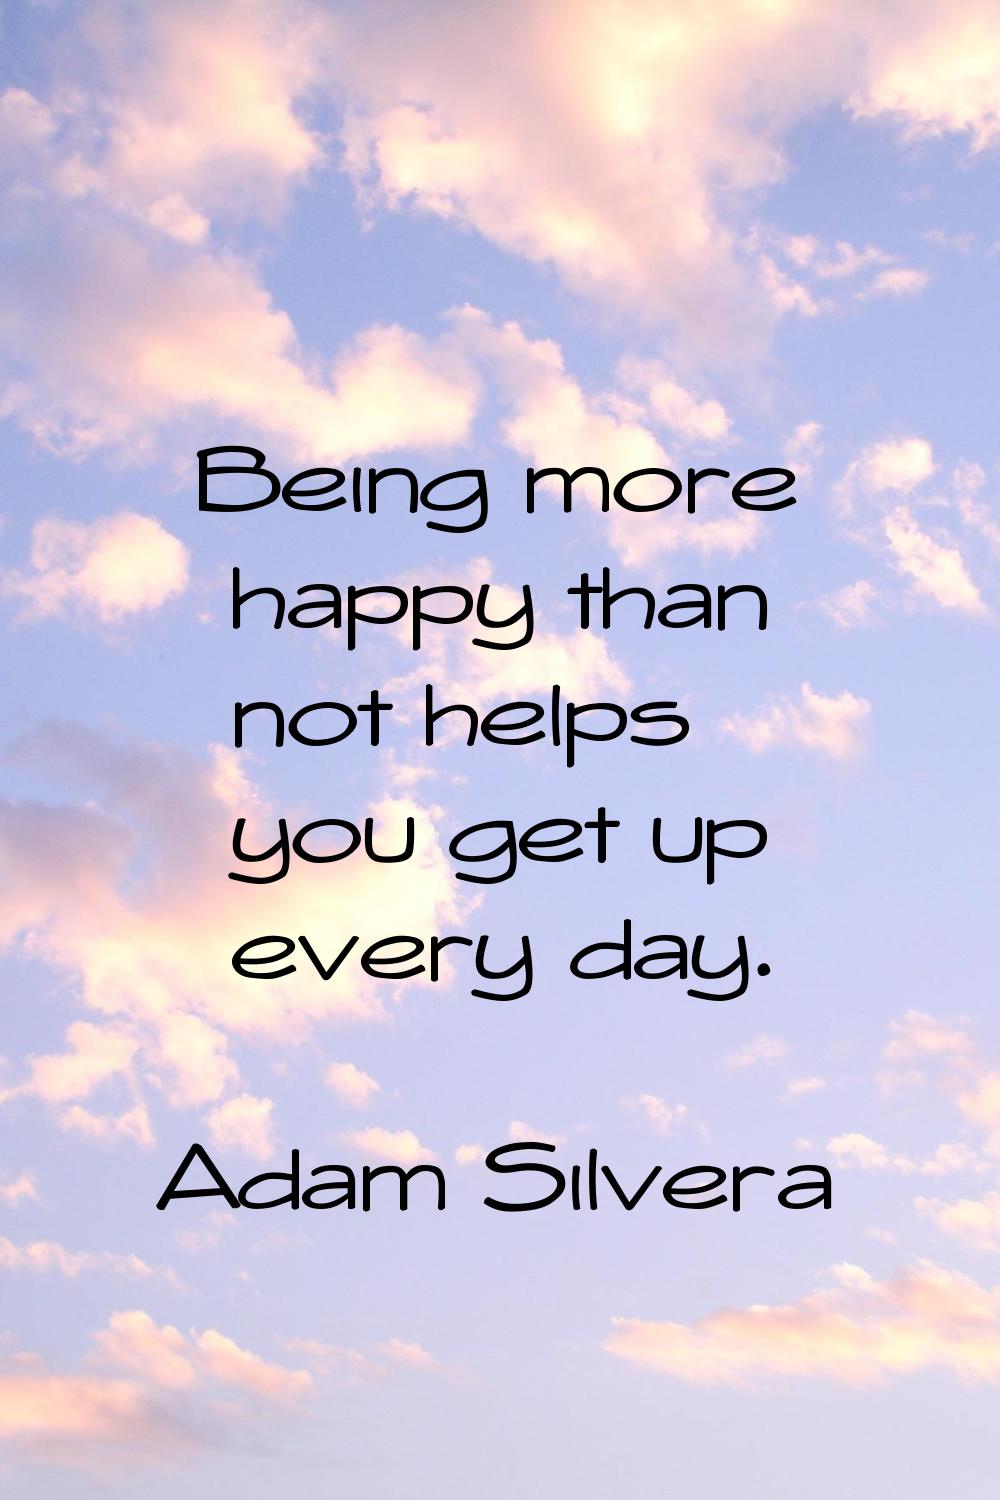 Being more happy than not helps you get up every day.